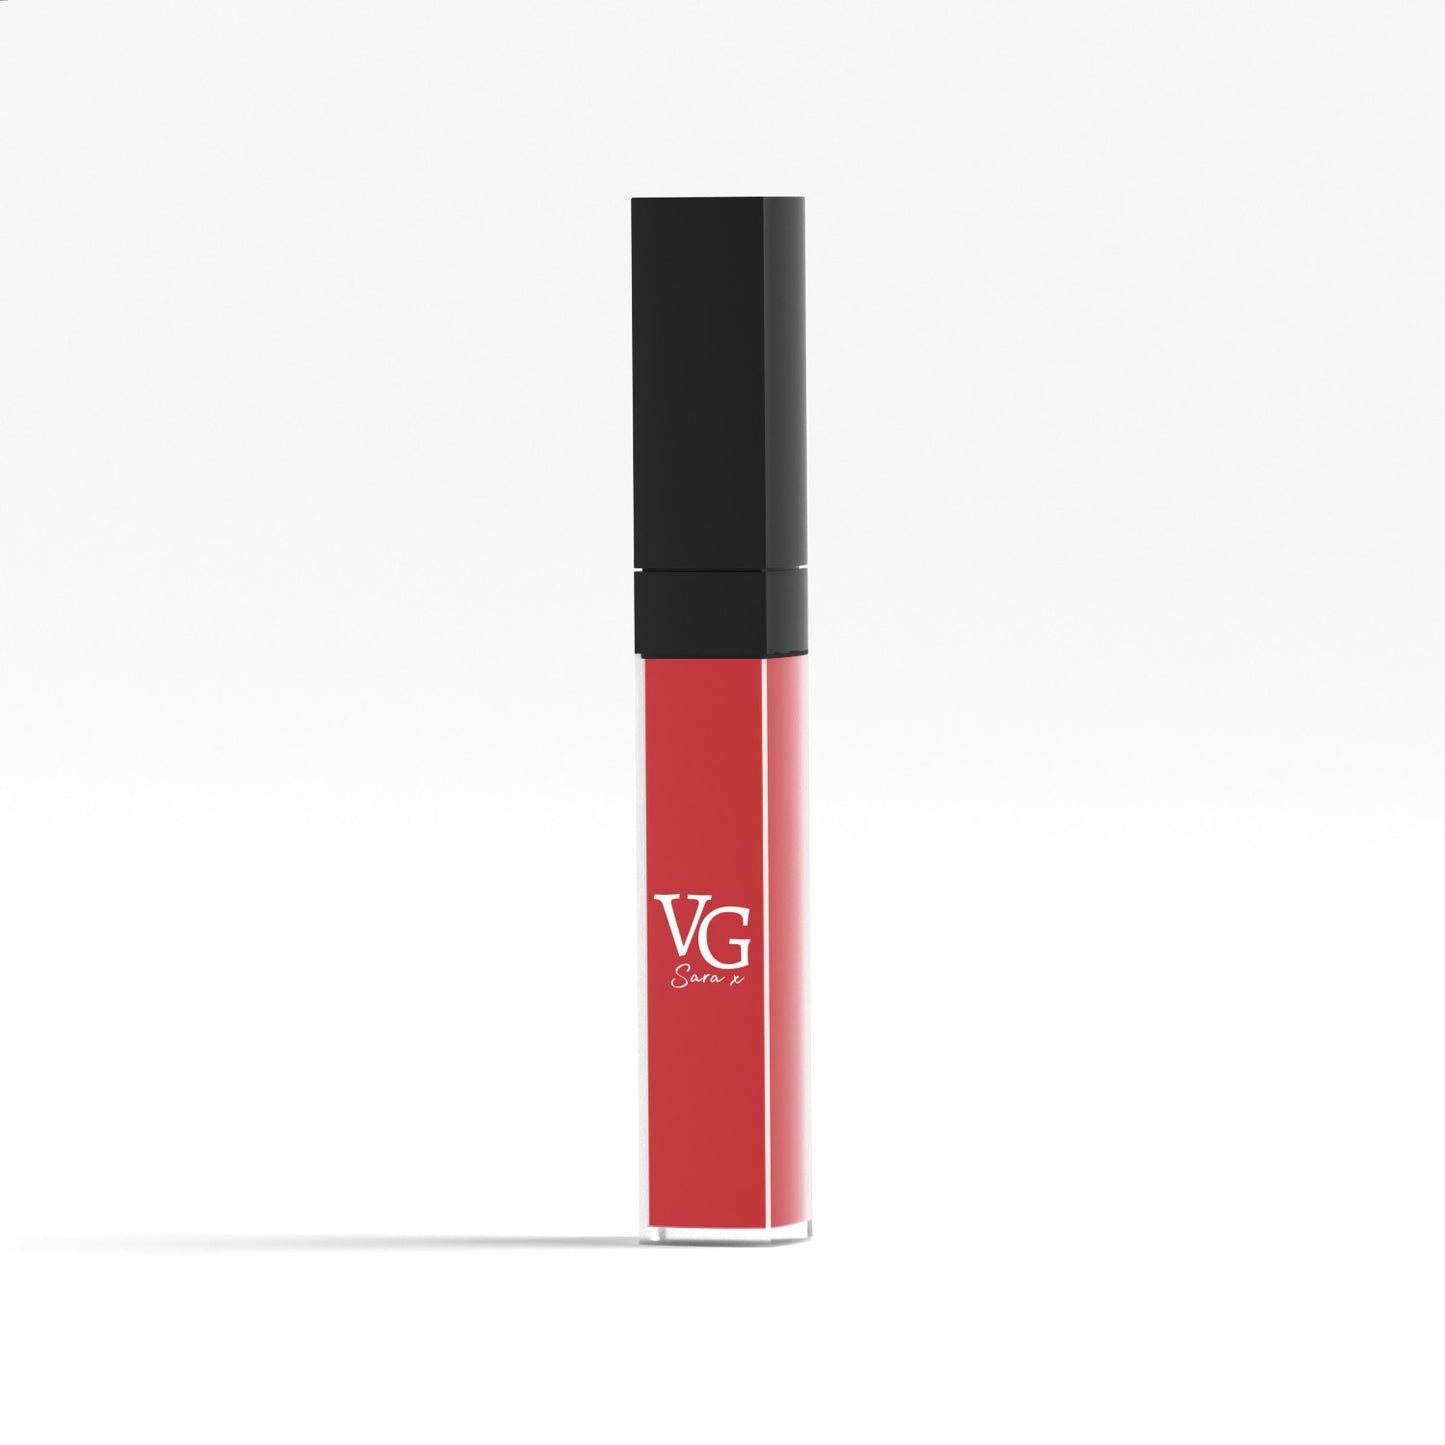 Sustainable VG-branded liquid lipstick in classic red